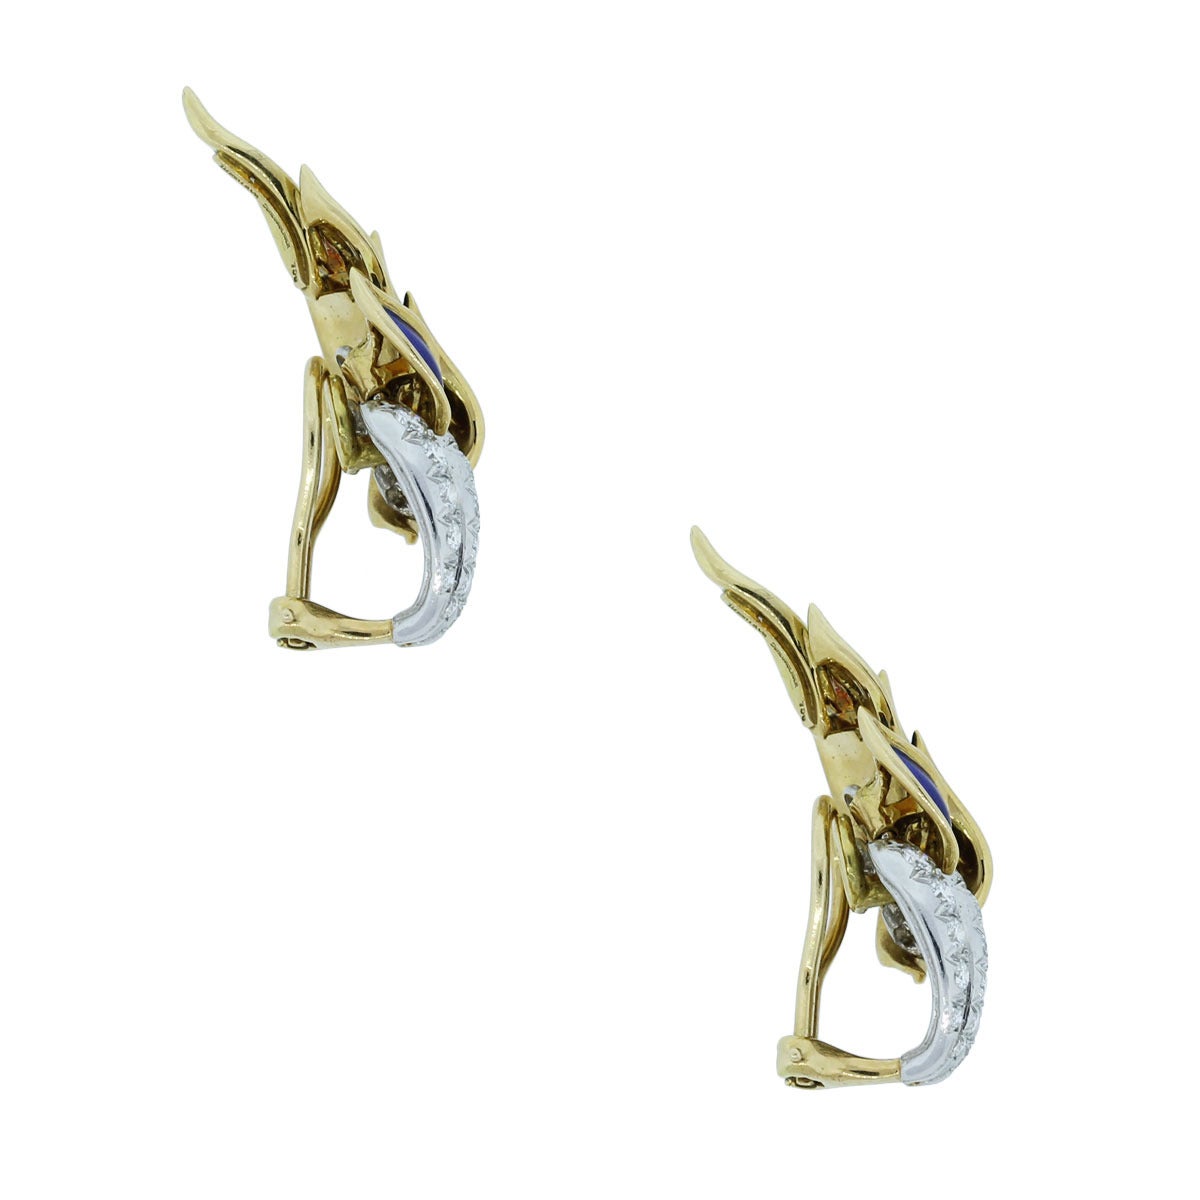 Brand: Tiffany & Co.
Style: Schlumberger 18k Yellow Gold Enamel Diamonds Flame Earrings
Diamonds: 2ctw of Round Brilliant diamonds. Diamonds are E/F in color and VS in clarity
Measurements: 2.12